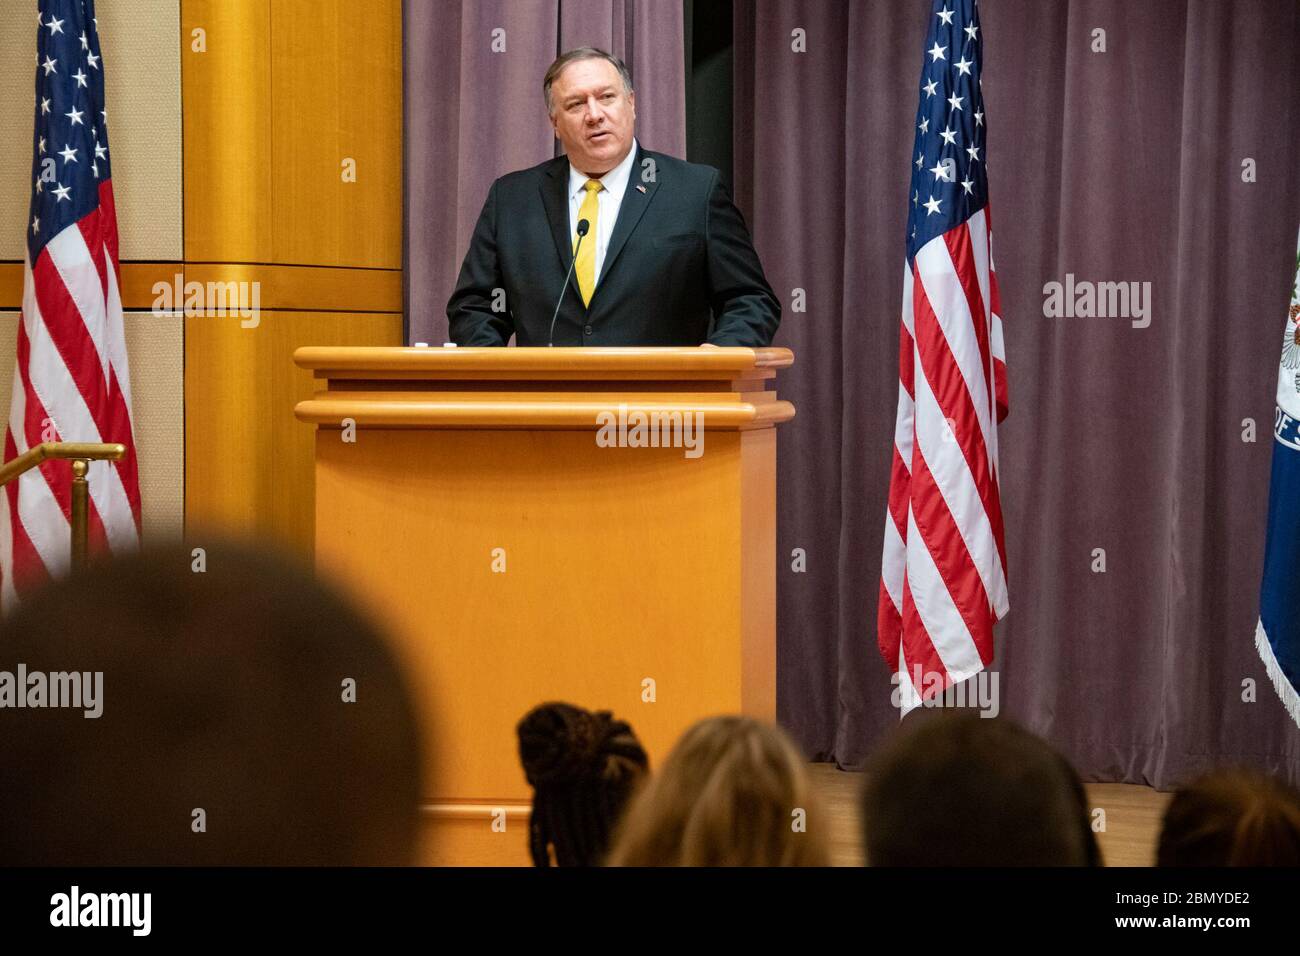 Secretary Pompeo Gives Remarks at the 2019 Presidential Management Fellow (PMF) Graduation Ceremony U.S. Secretary of State Michael R. Pompeo gives remarks at the 2019 Presidential Management Fellow (PMF) graduation ceremony at the U.S. Department of State in Washington, D.C., on June 19, 2019. Stock Photo